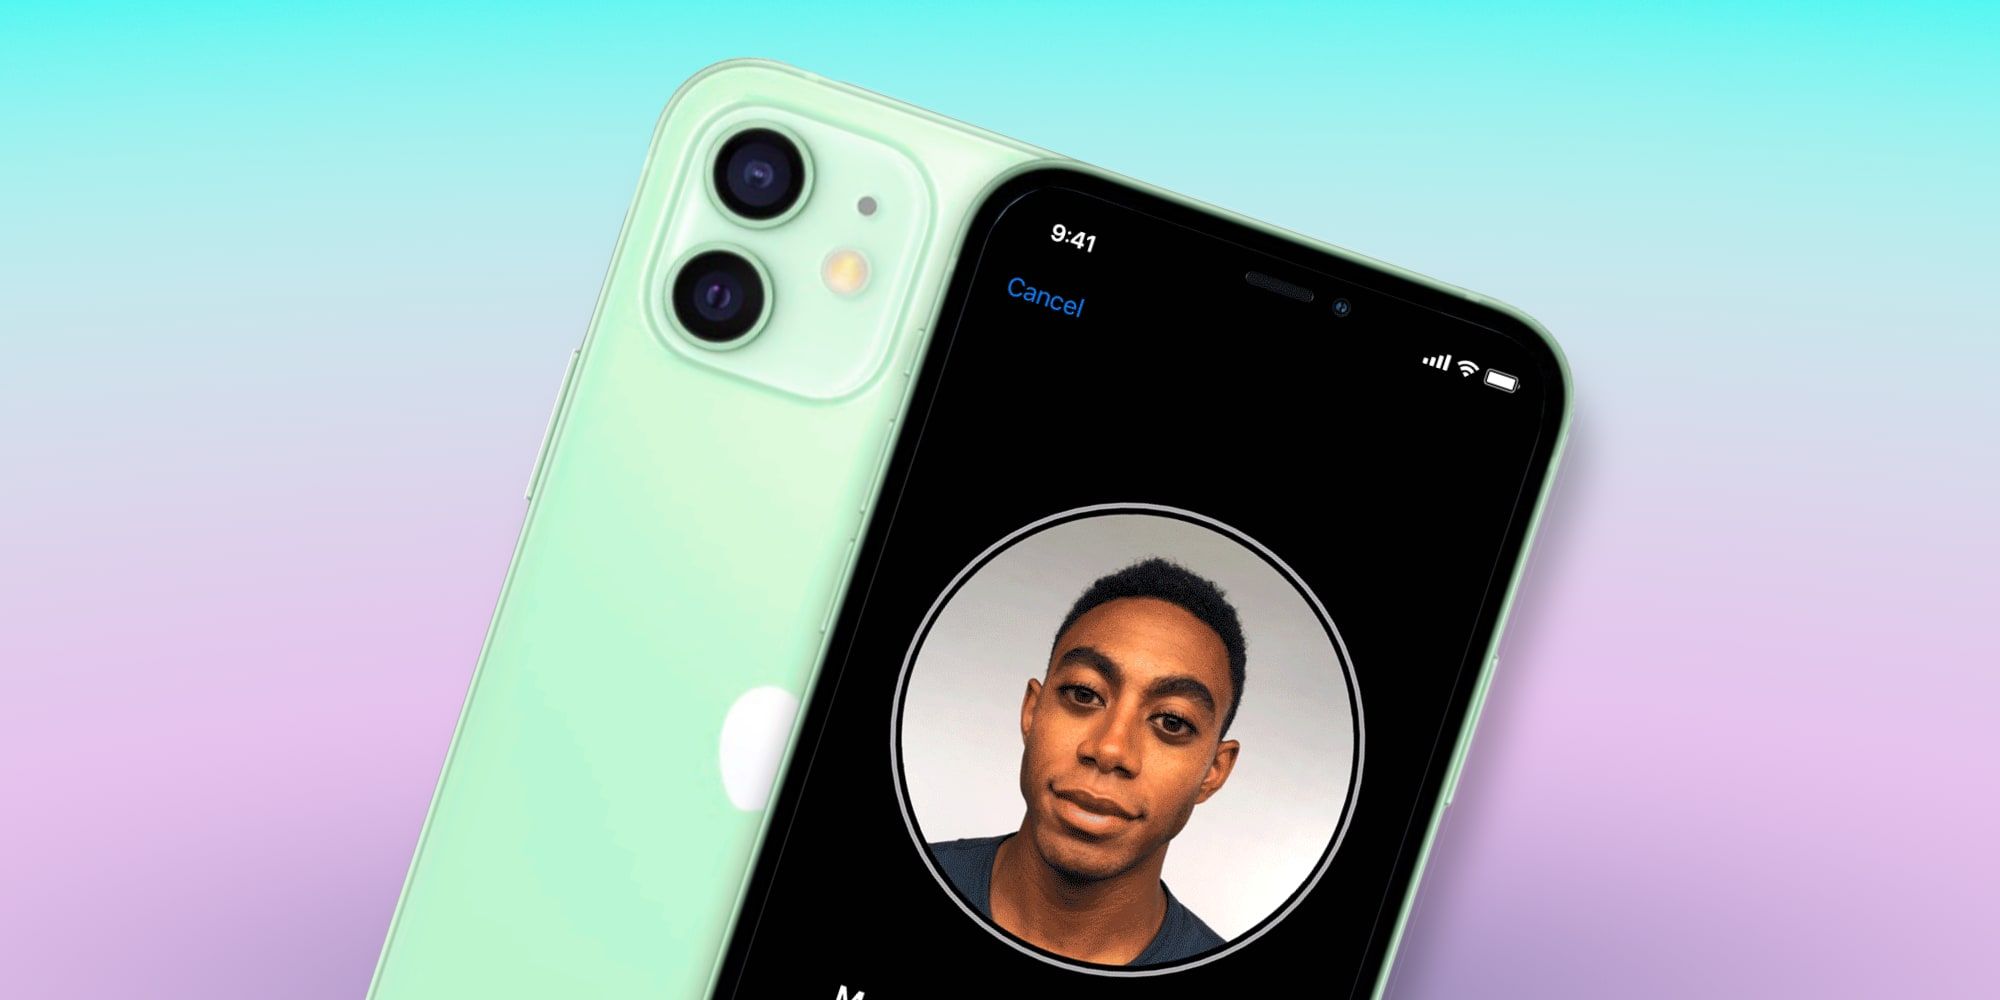 How To Add Multiple People To Face ID On iPhone